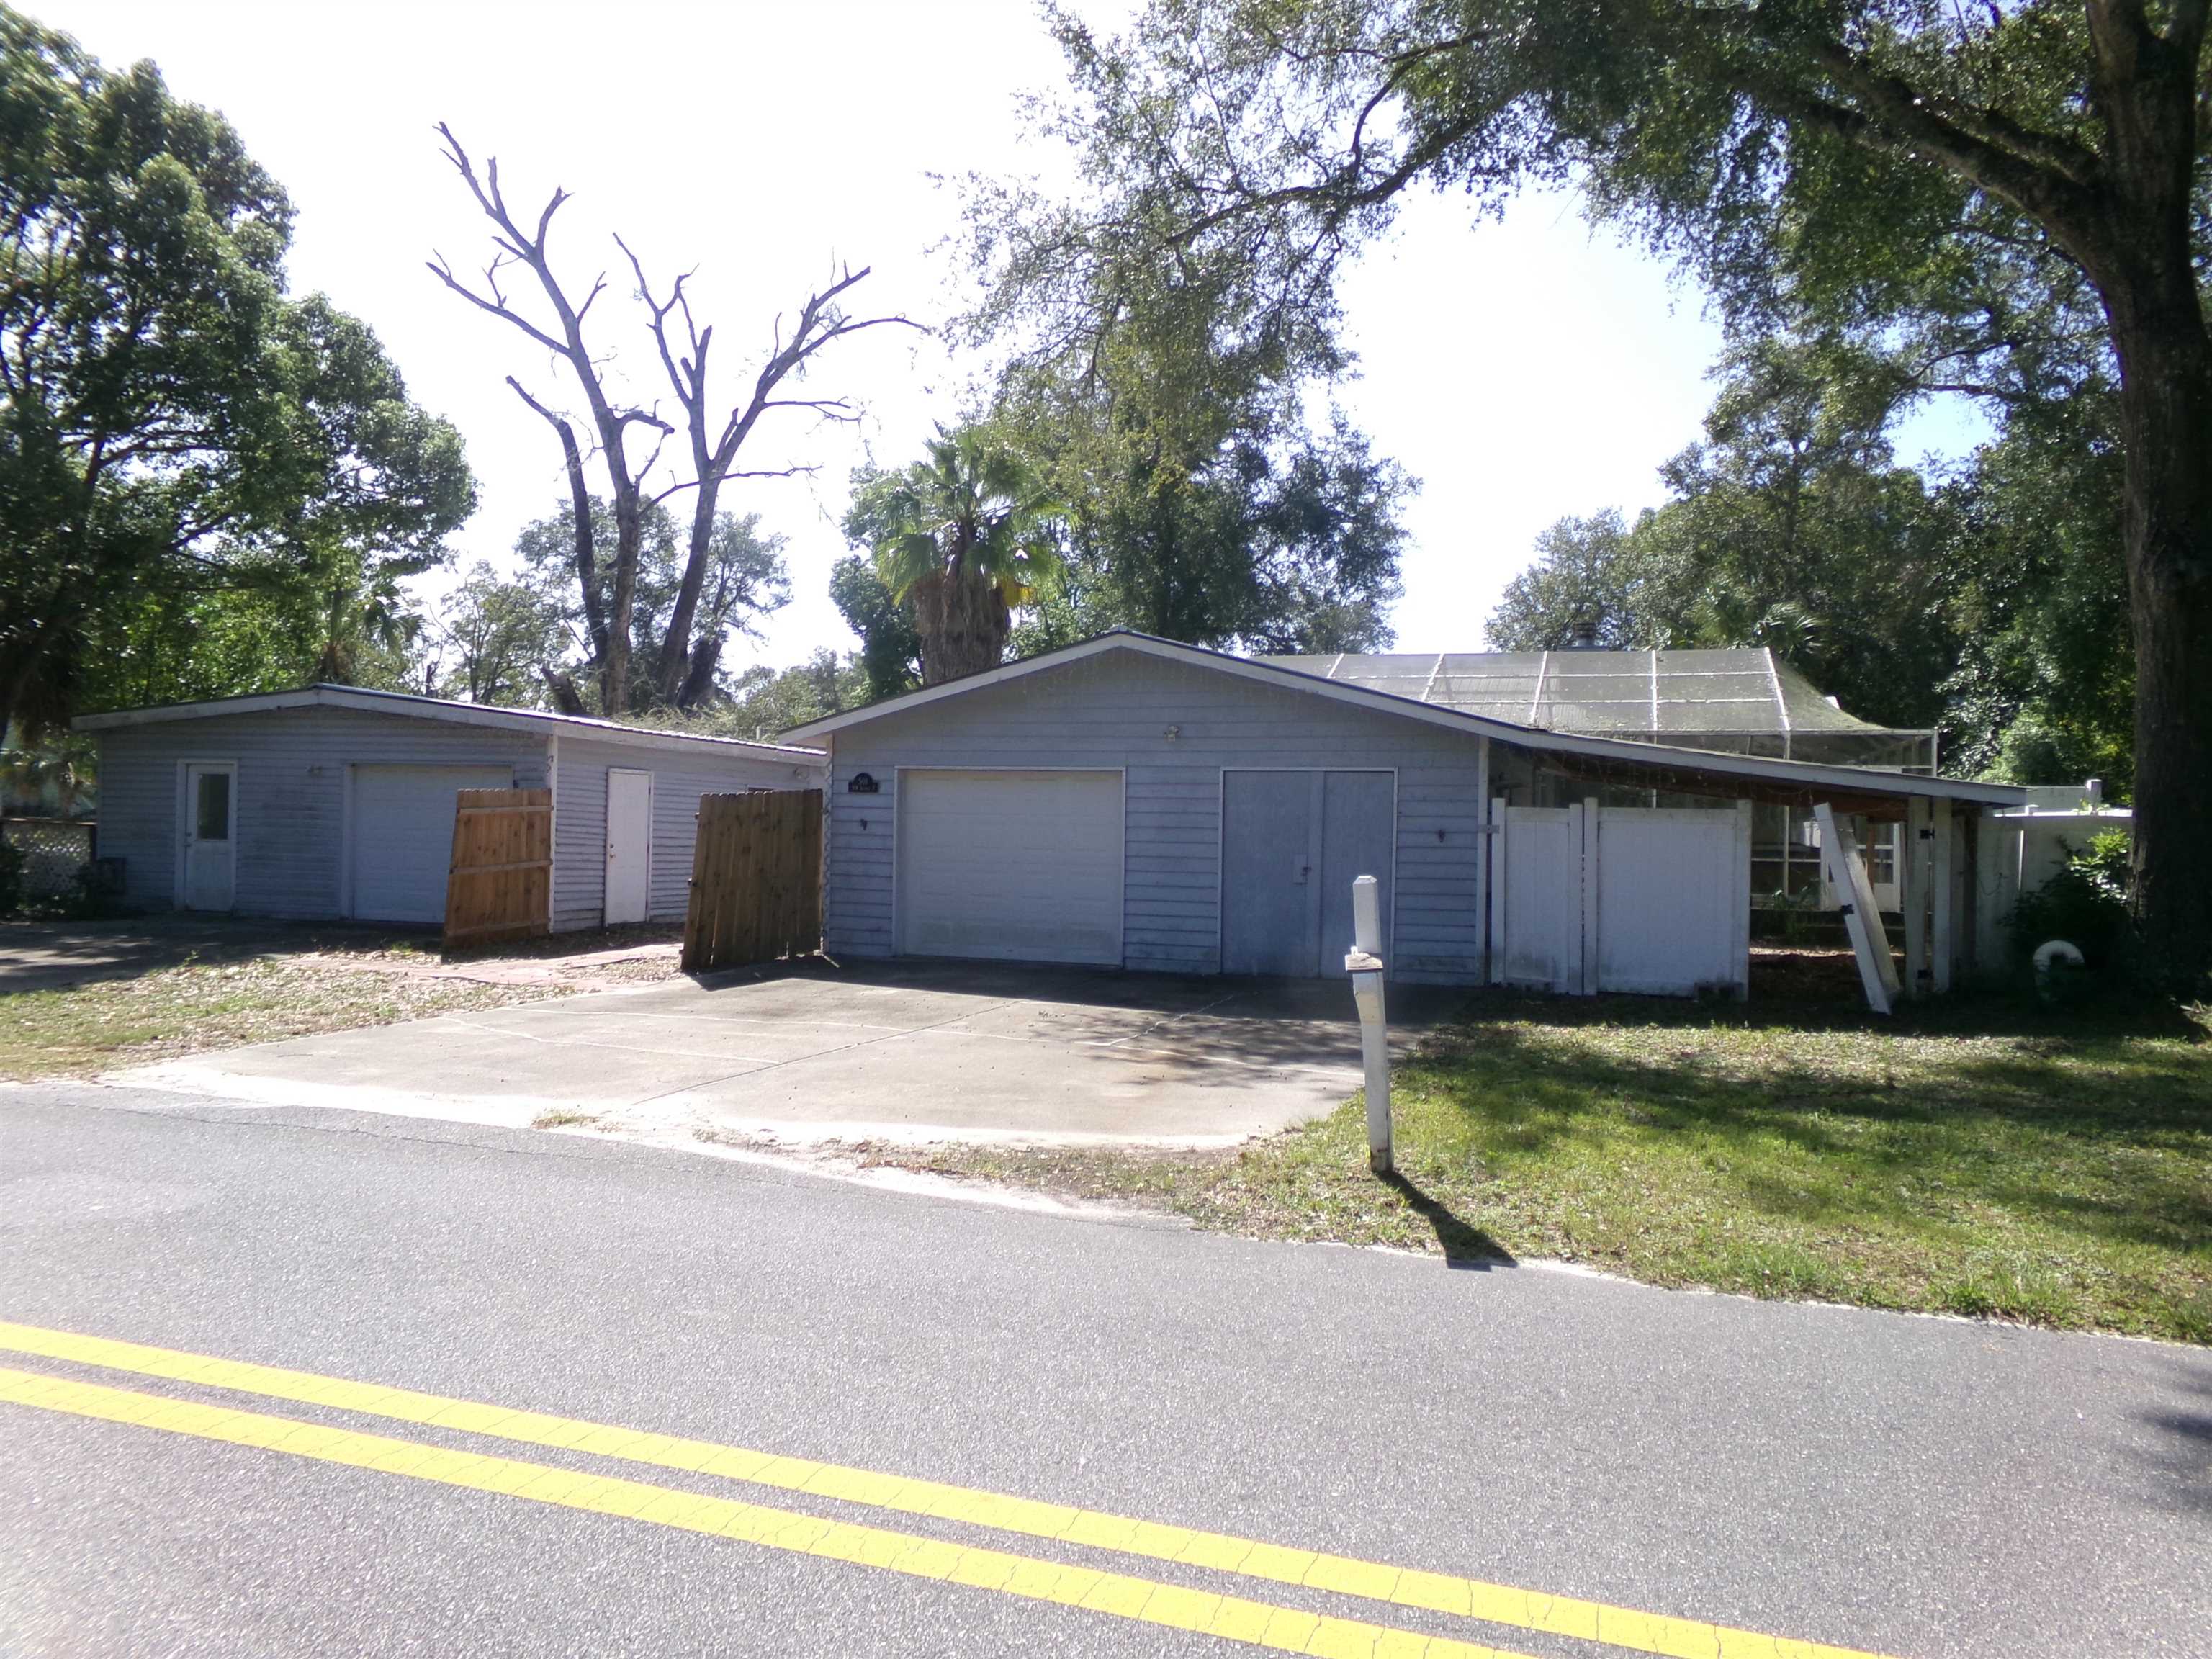 501 NW Avenue F Street,CARRABELLE,Florida 32322,4 Bedrooms Bedrooms,3 BathroomsBathrooms,Detached single family,501 NW Avenue F Street,365143